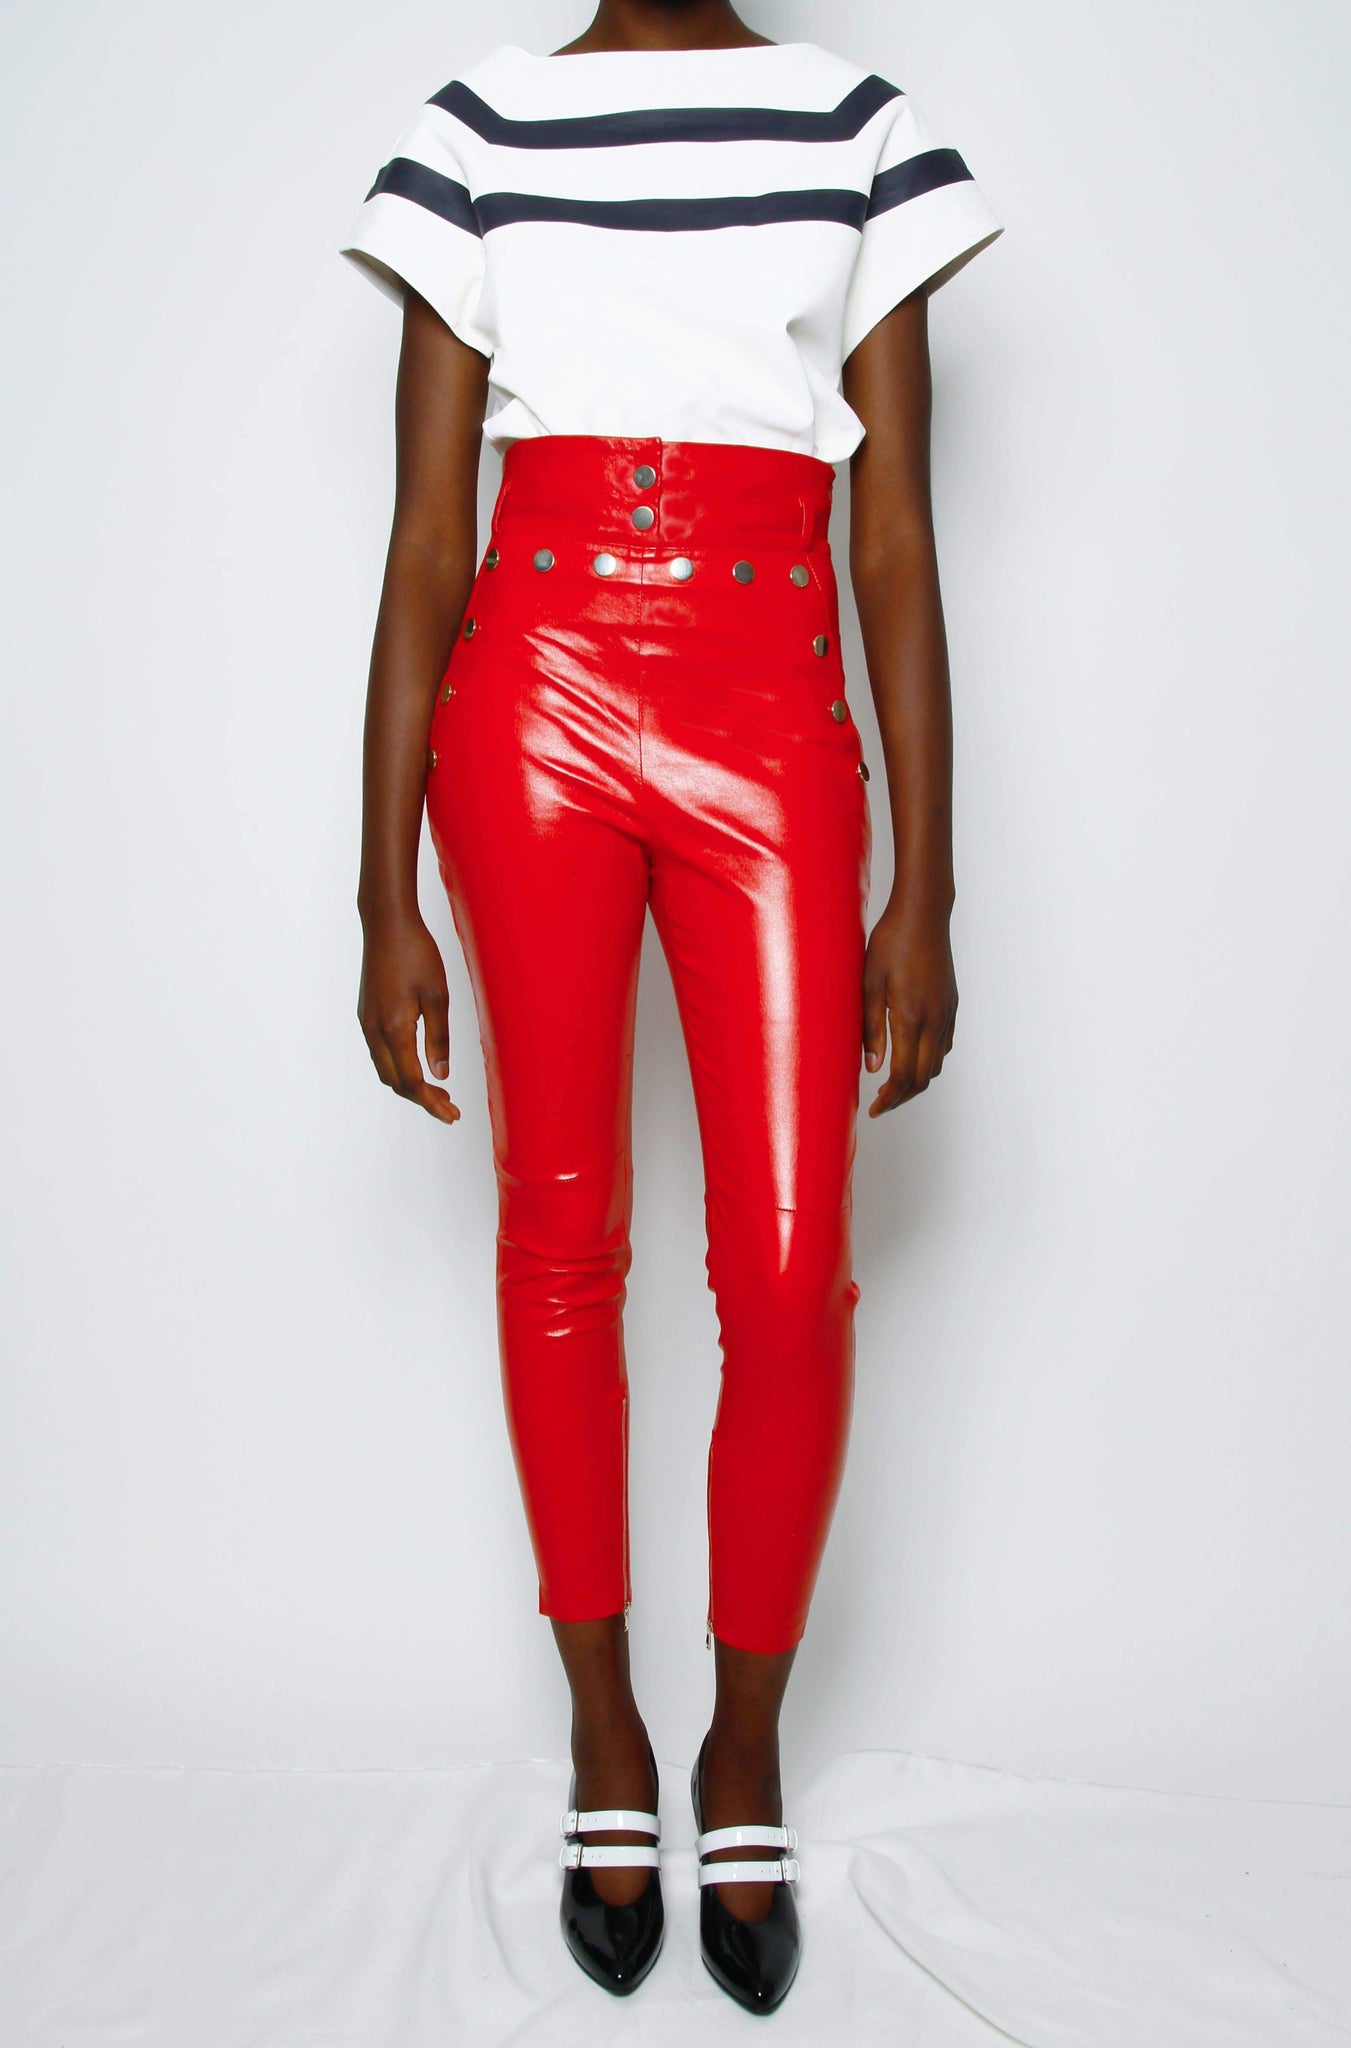 Bagatelle city stretch leather legging skinny pants cherry red XS NWT $595